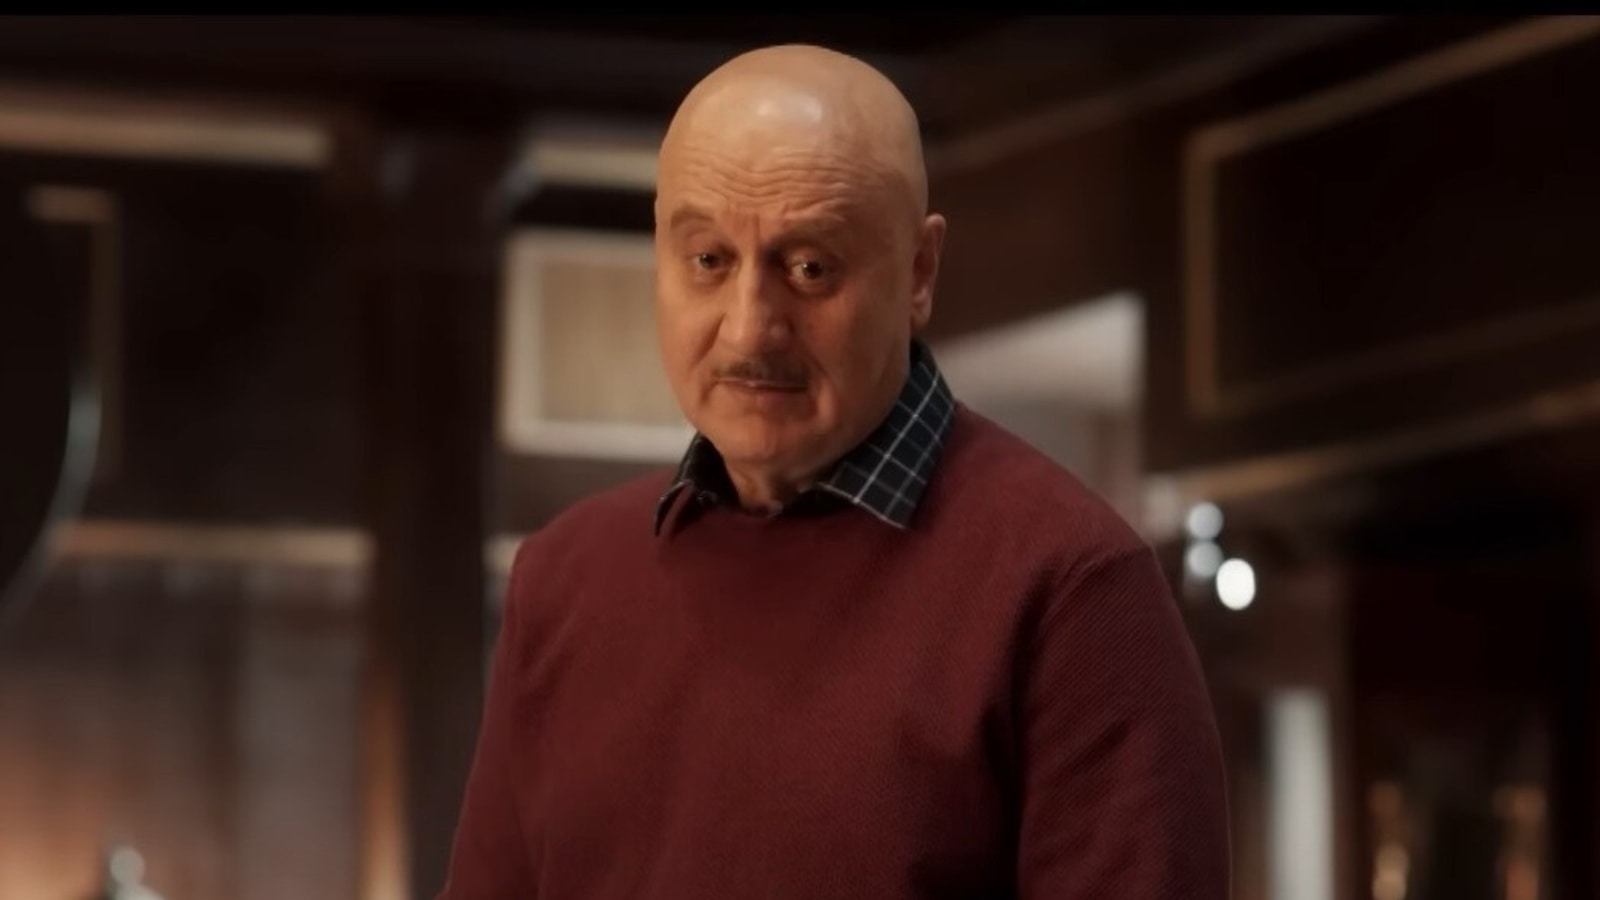 Anupam Kher says ‘meri to nikal padi’ as his film Karthikeya 2 also becomes box office hit after The Kashmir Files